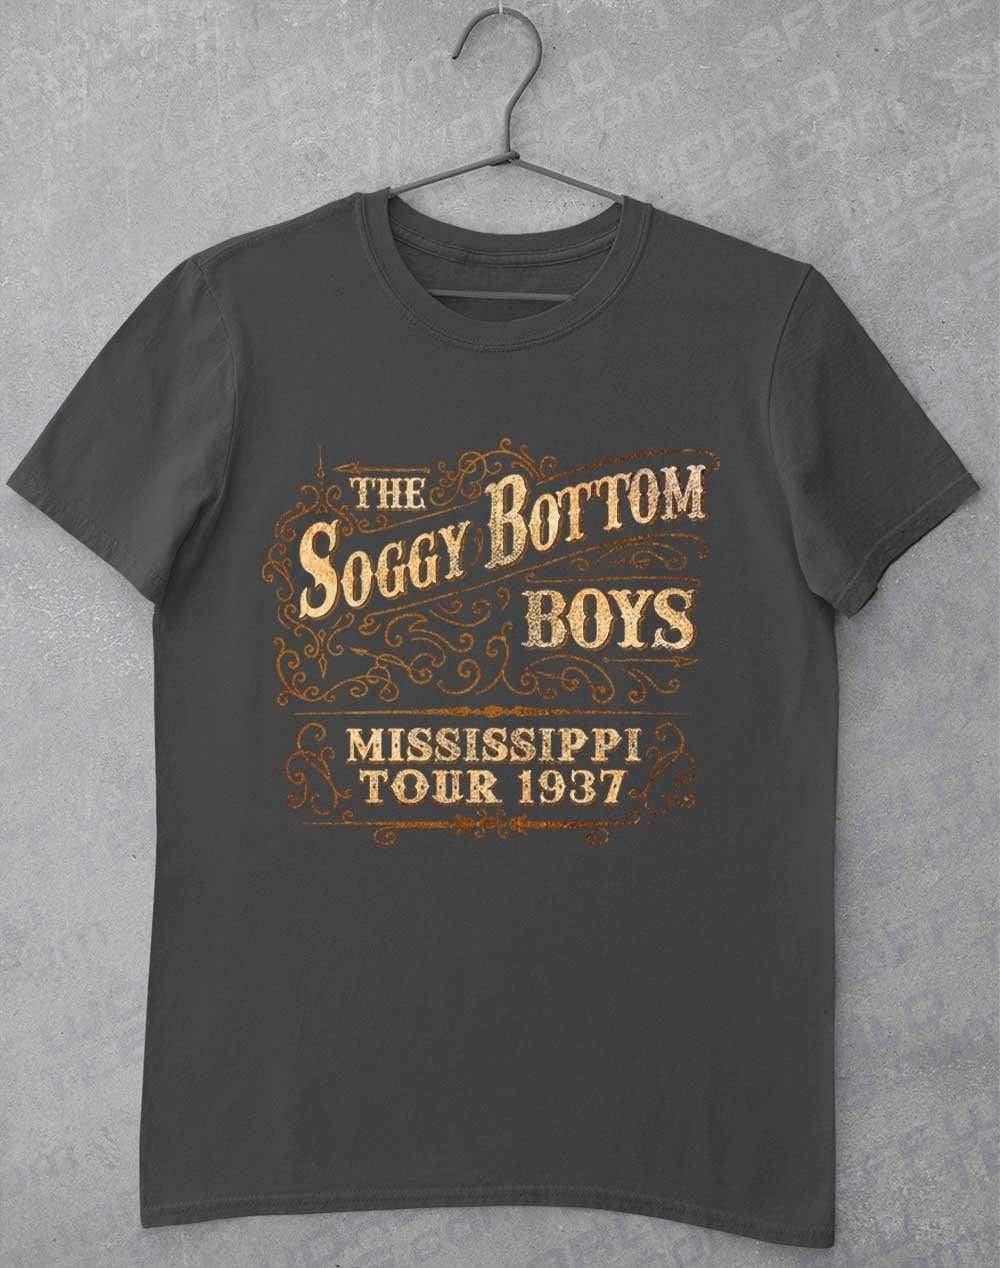 Soggy Bottom Boys Tour 1937 T-Shirt S / Charcoal  - Off World Tees